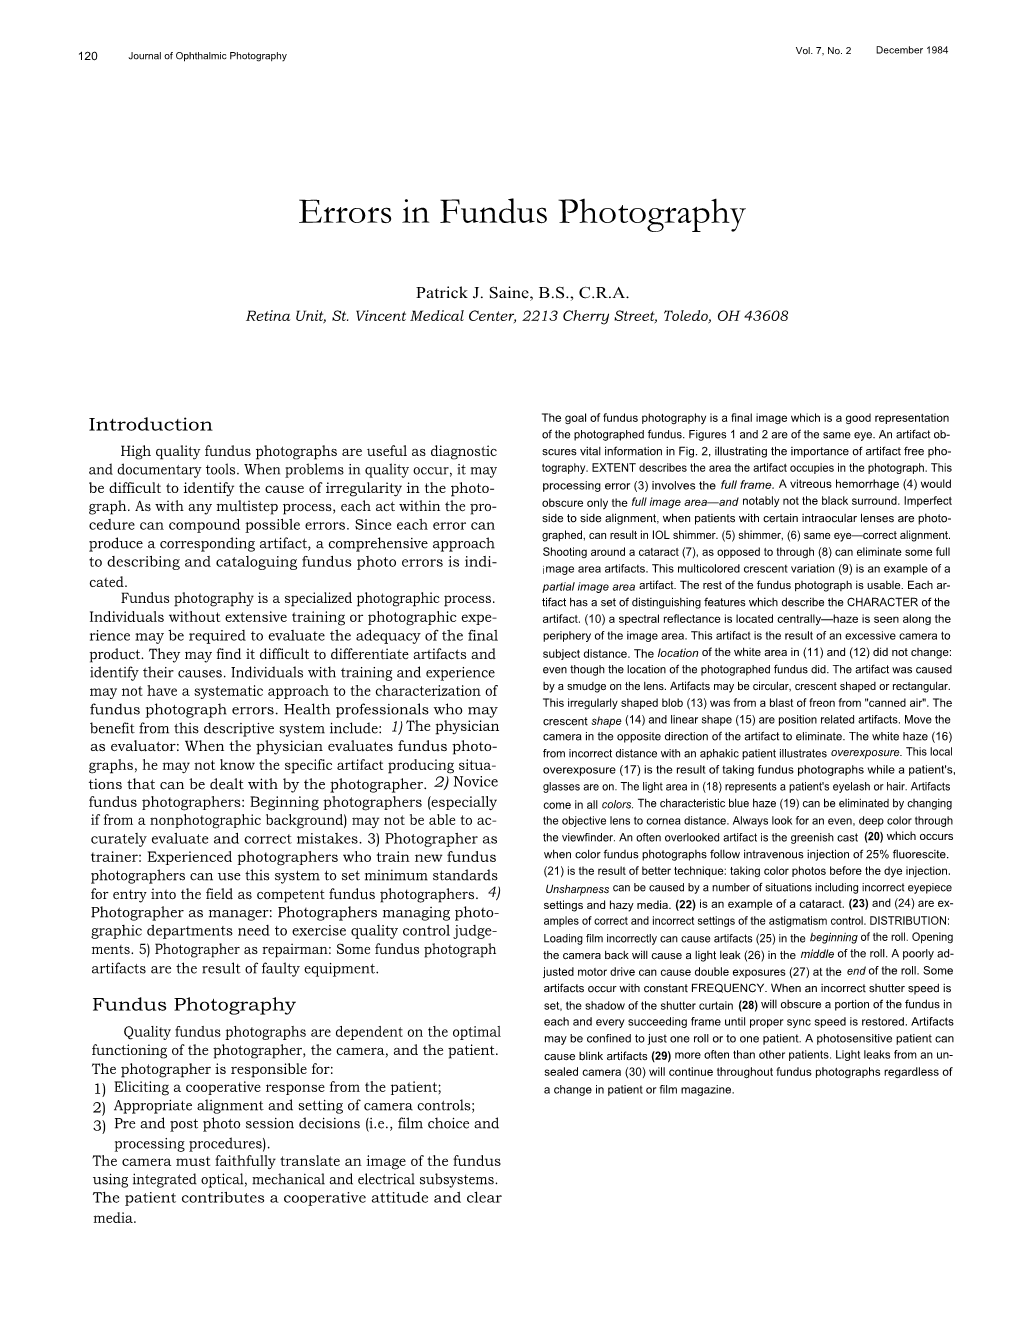 Errors in Fundus Photography